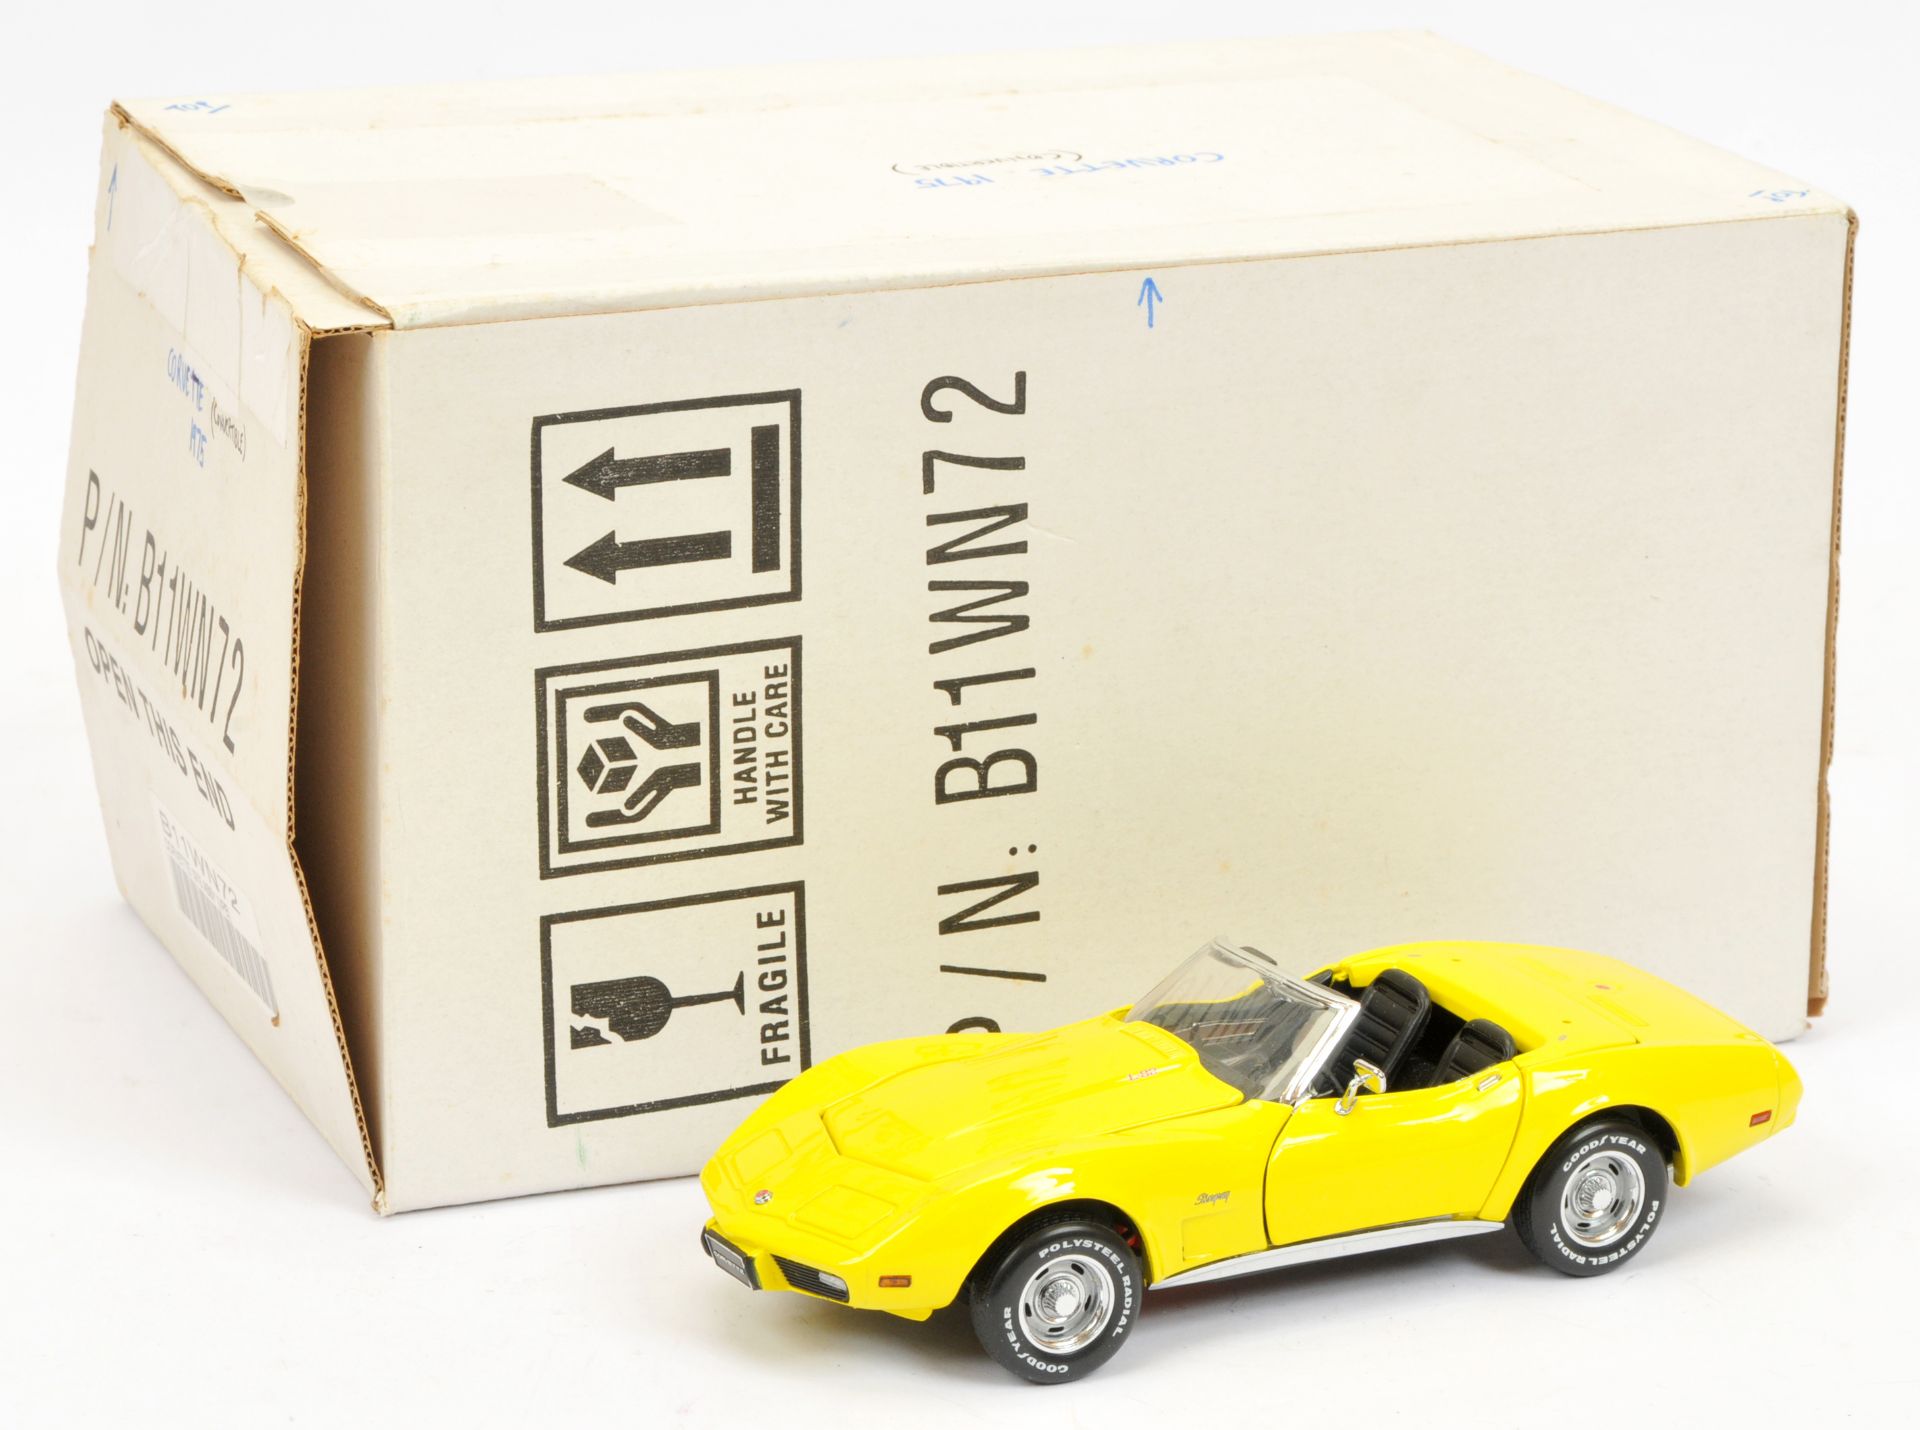 Franklin Mint B11WN72 1/24th scale 1975 Corvette convertible with FM Certificate of Authenticity ...